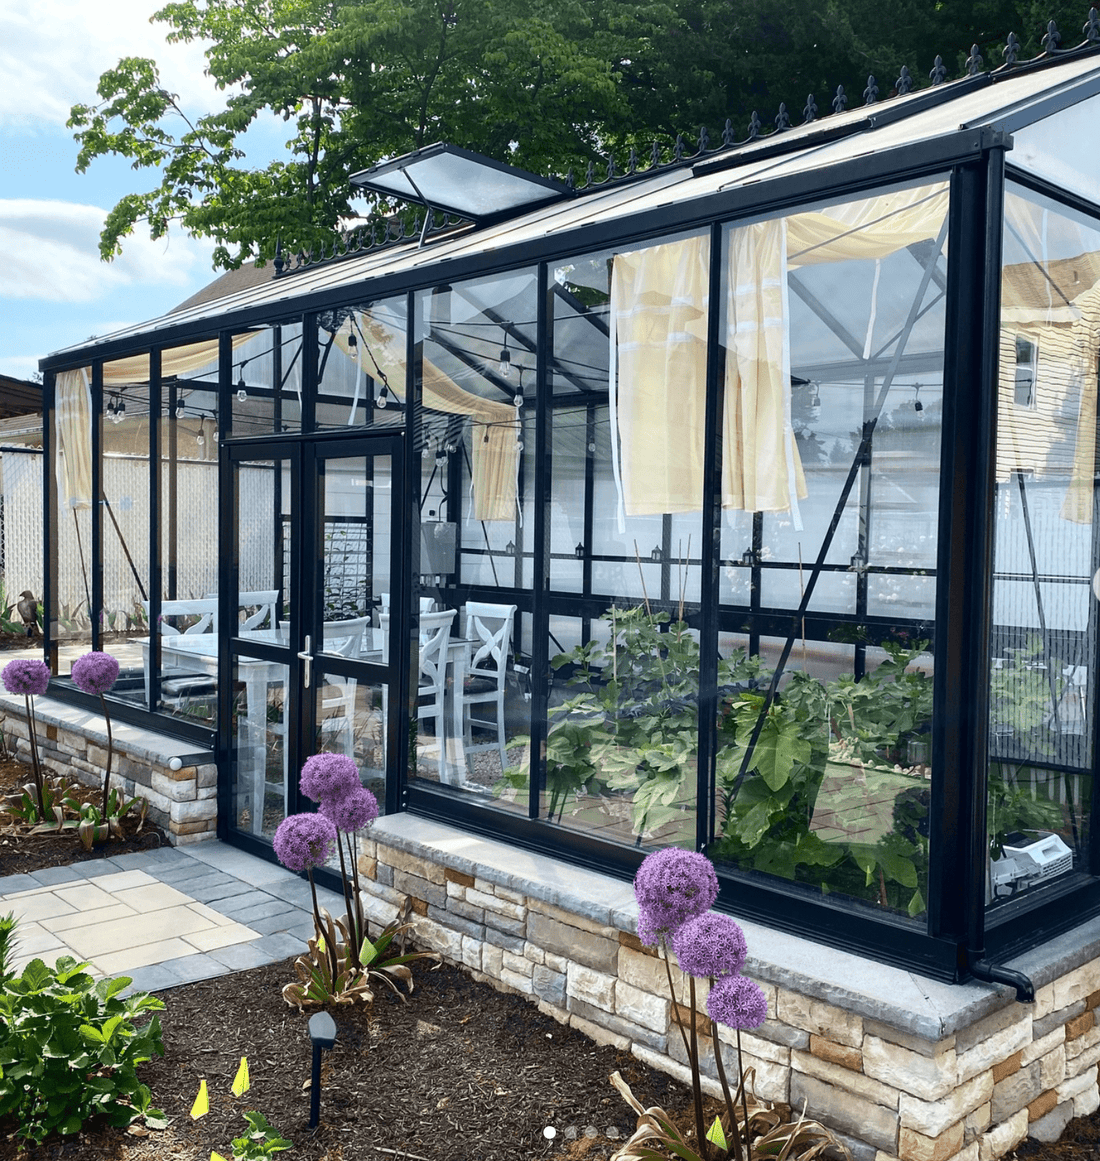 Installing Your Greenhouse on a Masonry Wall